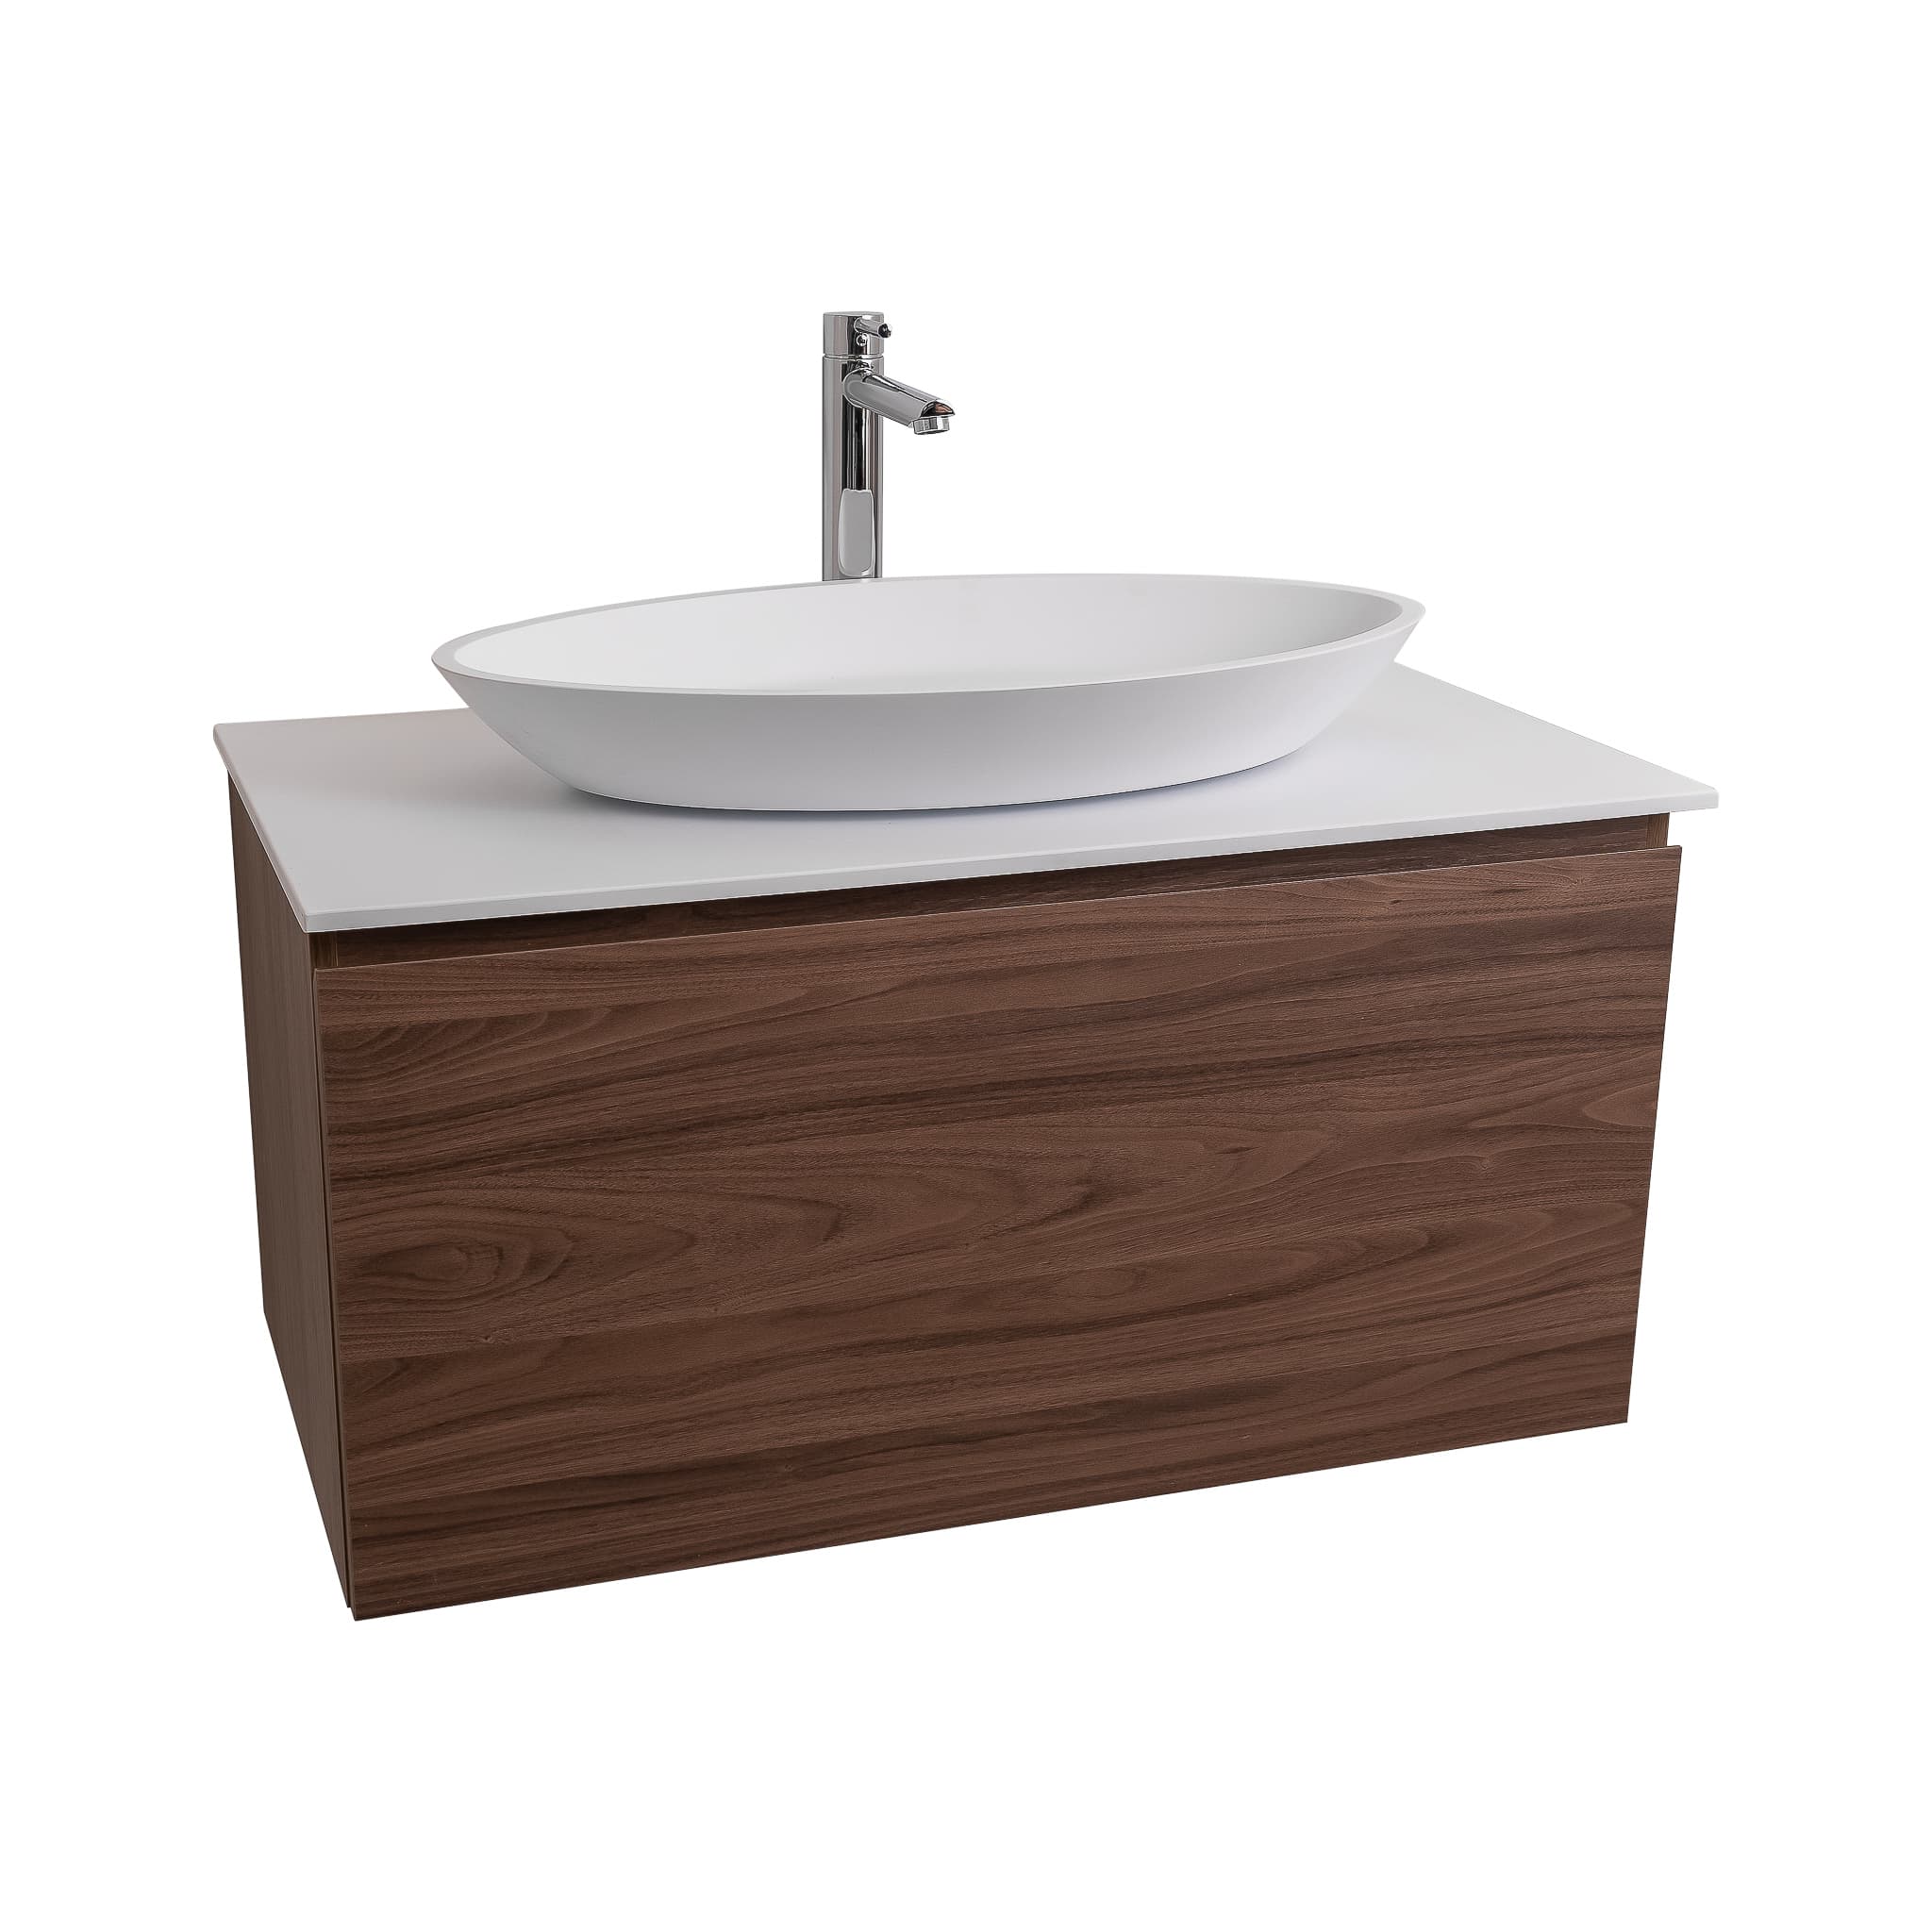 Venice 39.5 Walnut Wood Texture Cabinet, Solid Surface Flat White Counter And Oval Solid Surface White Basin 1305, Wall Mounted Modern Vanity Set